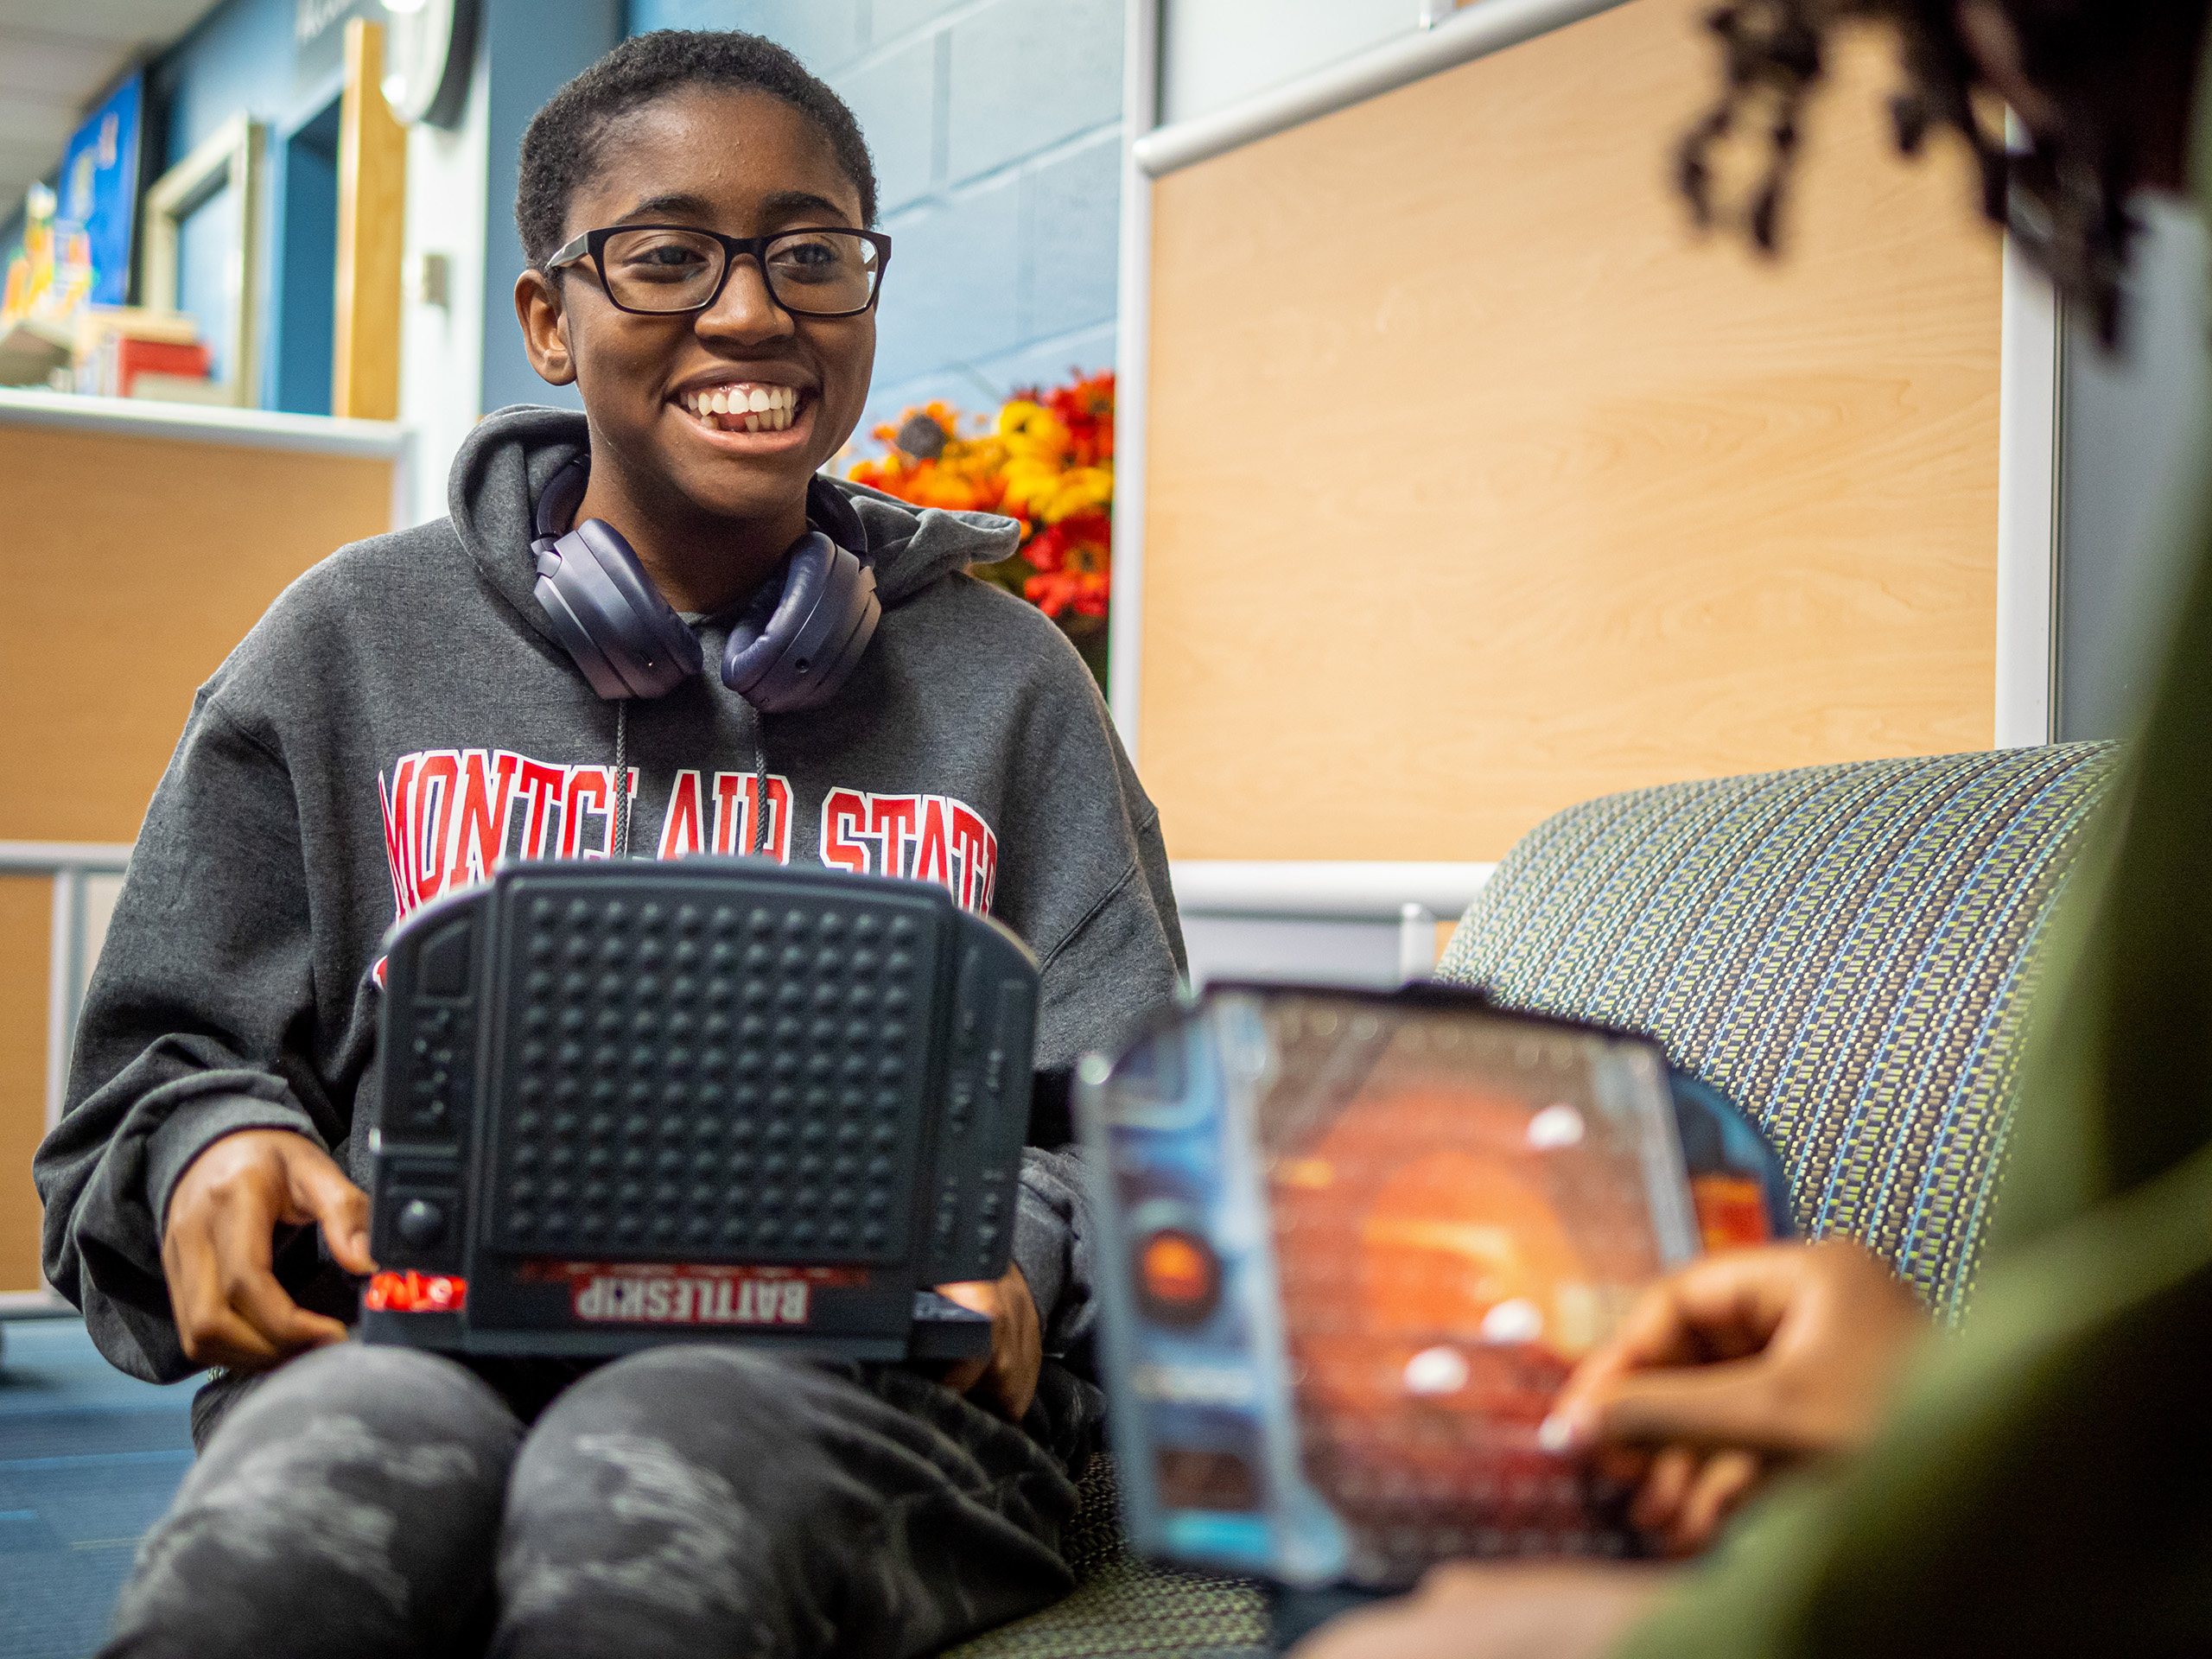 Student smiling with battleship game on lap